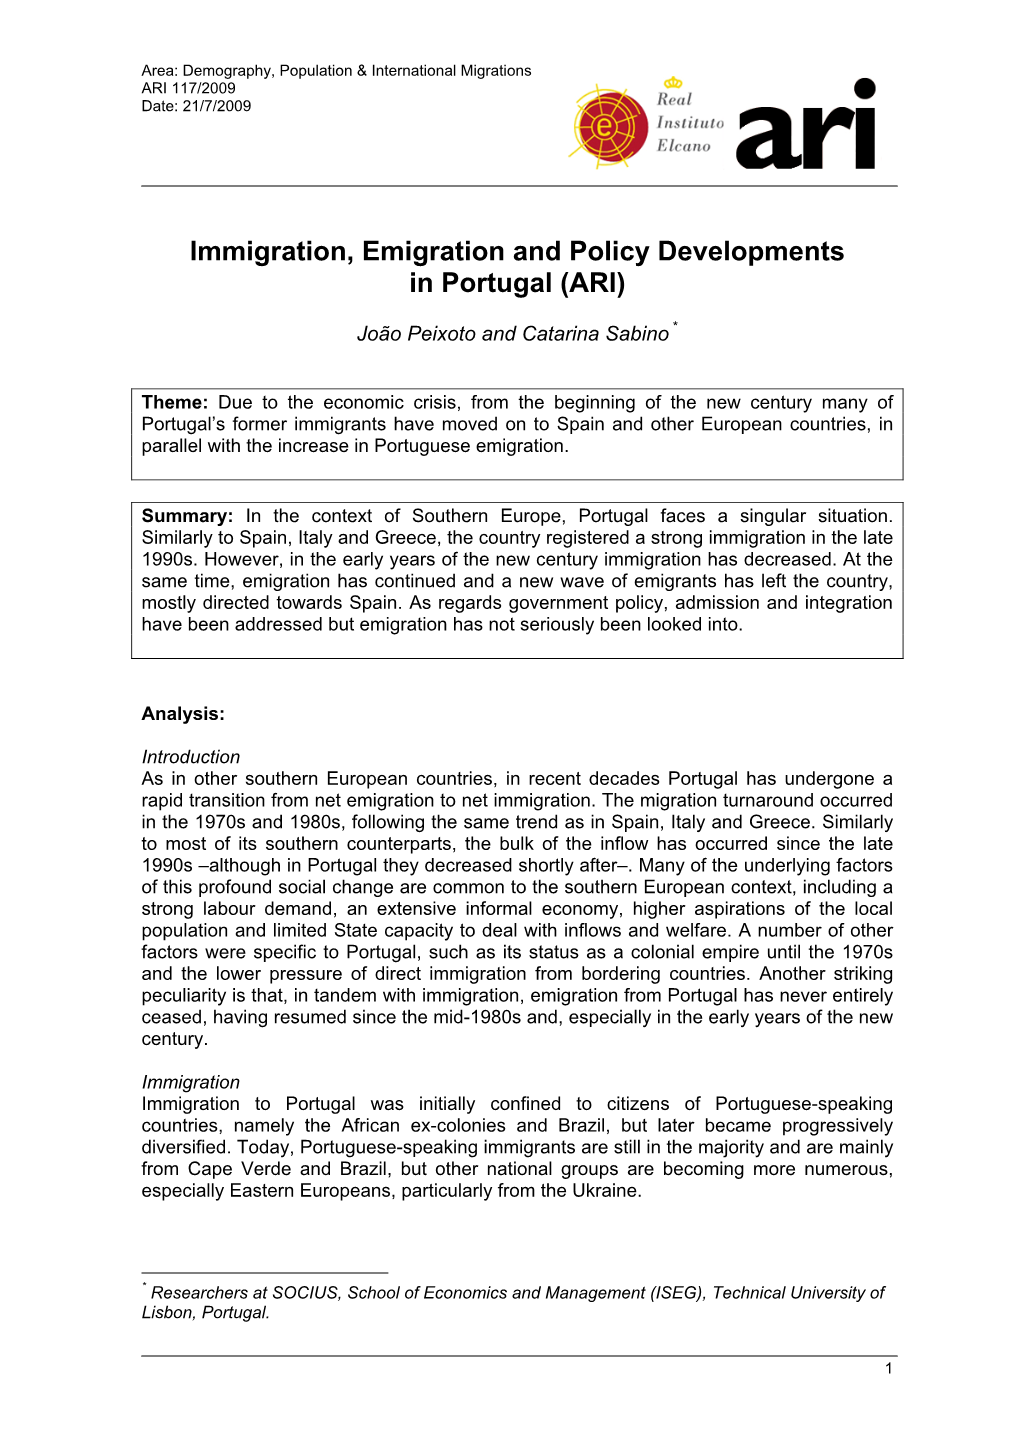 Immigration, Emigration and Policy Developments in Portugal (ARI)